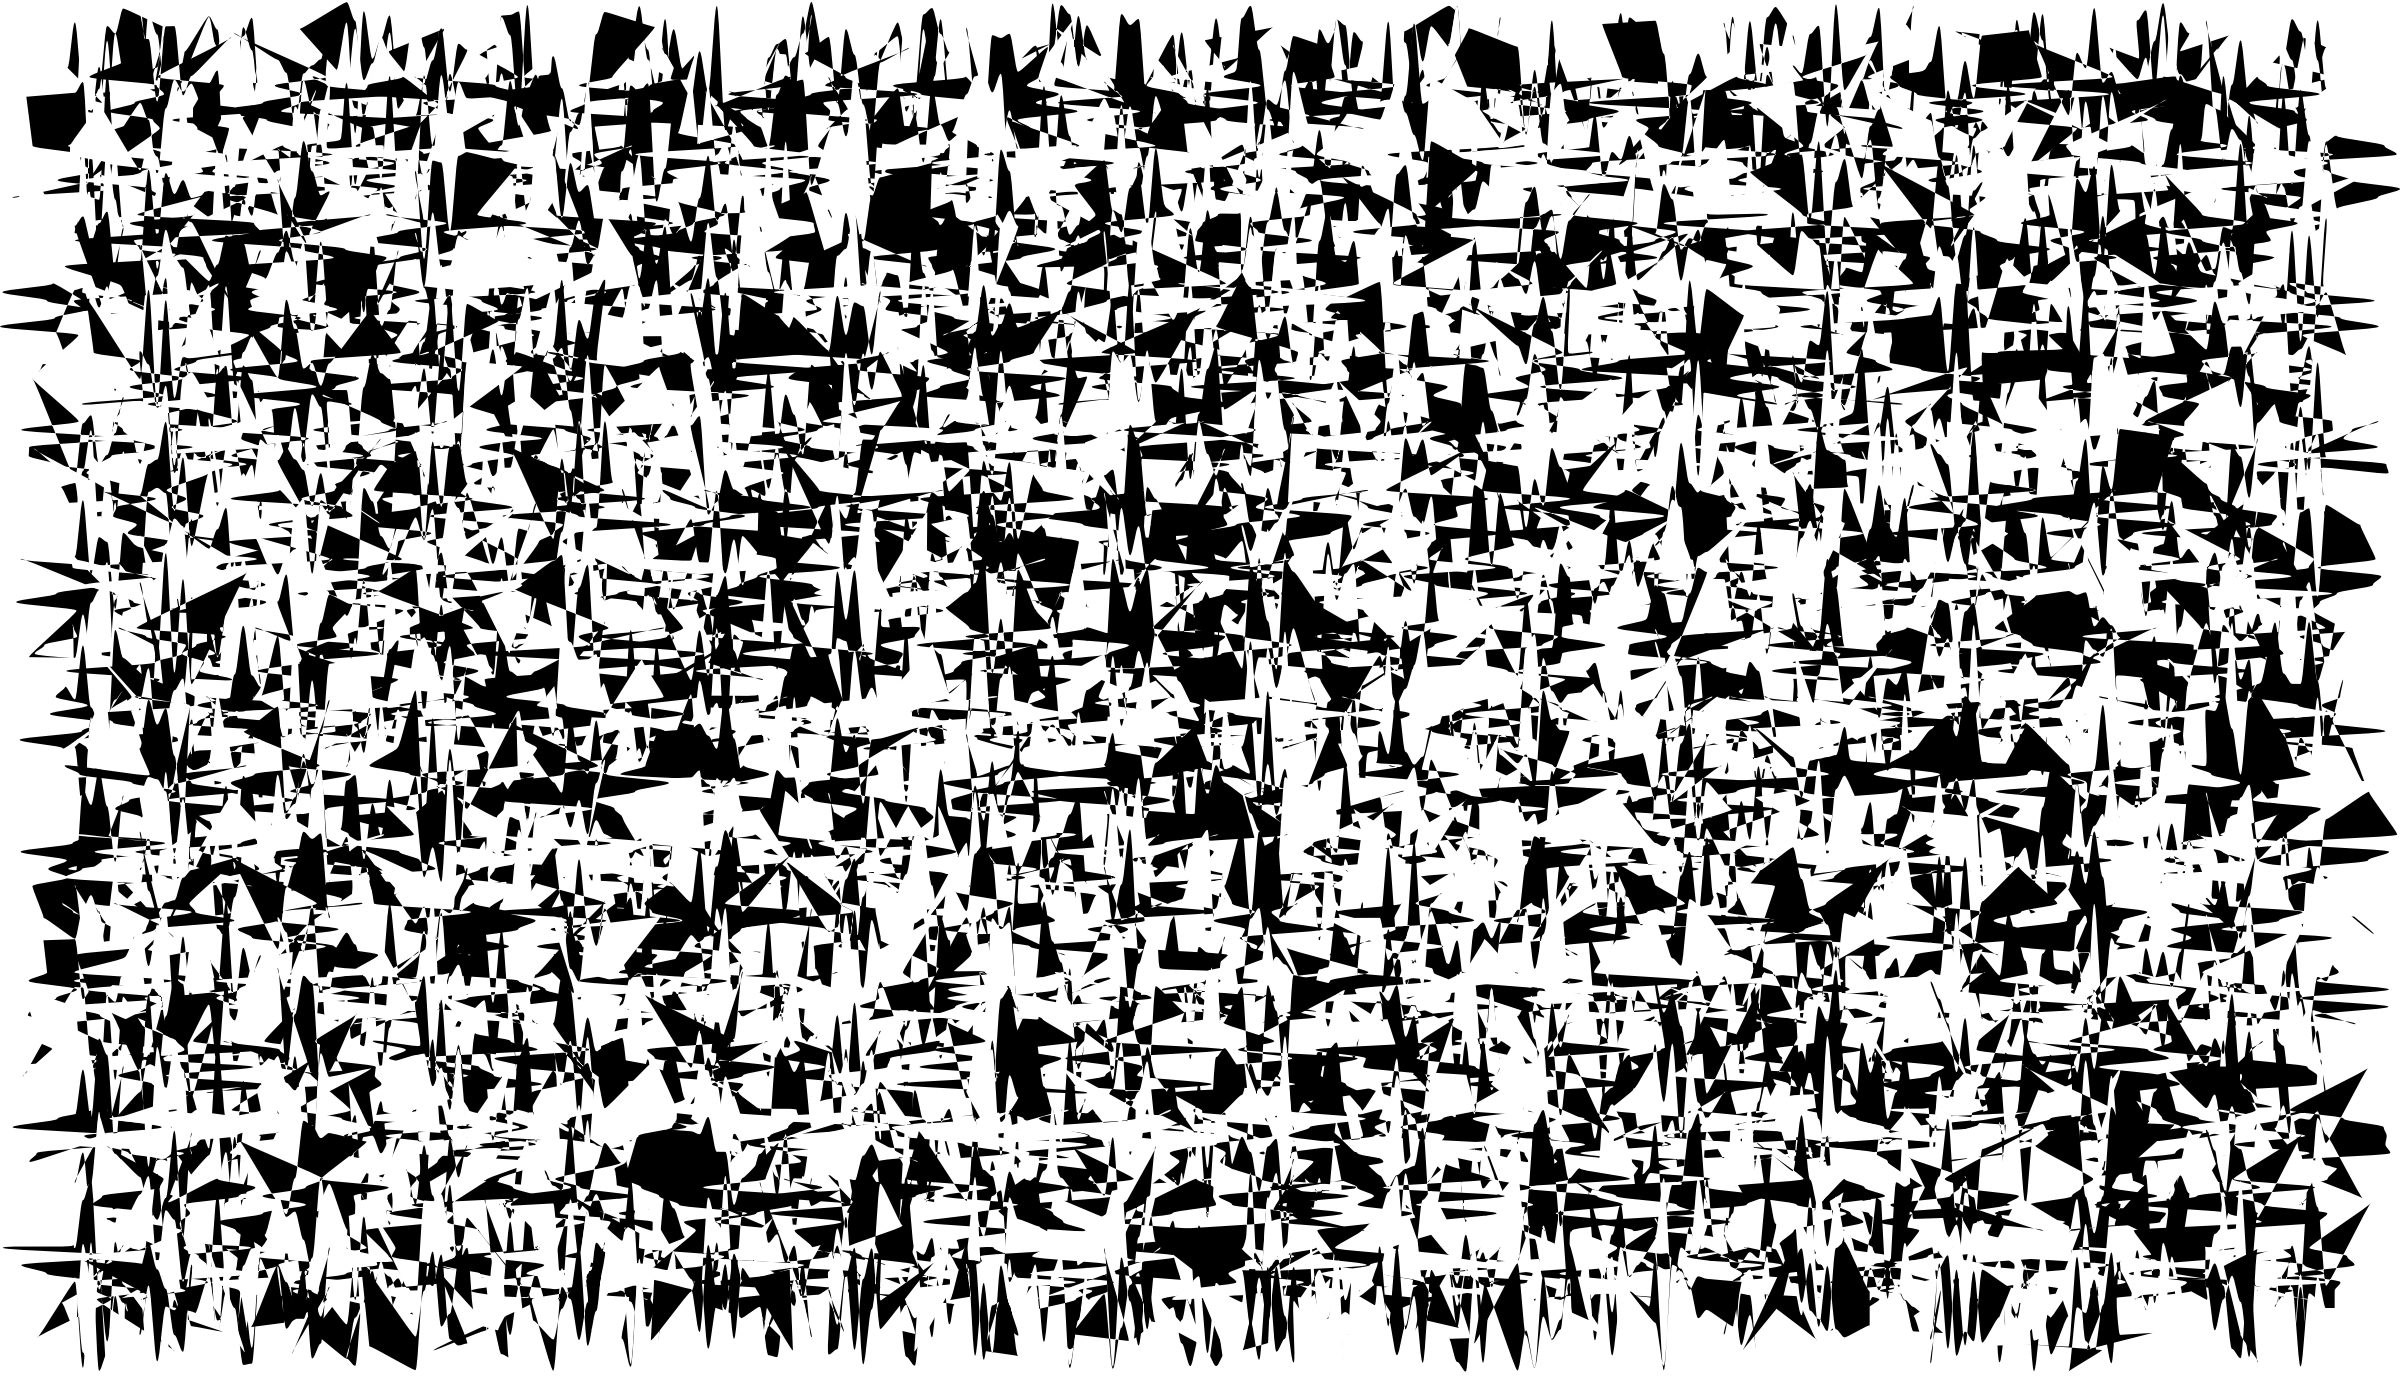 crowd clipart abstract